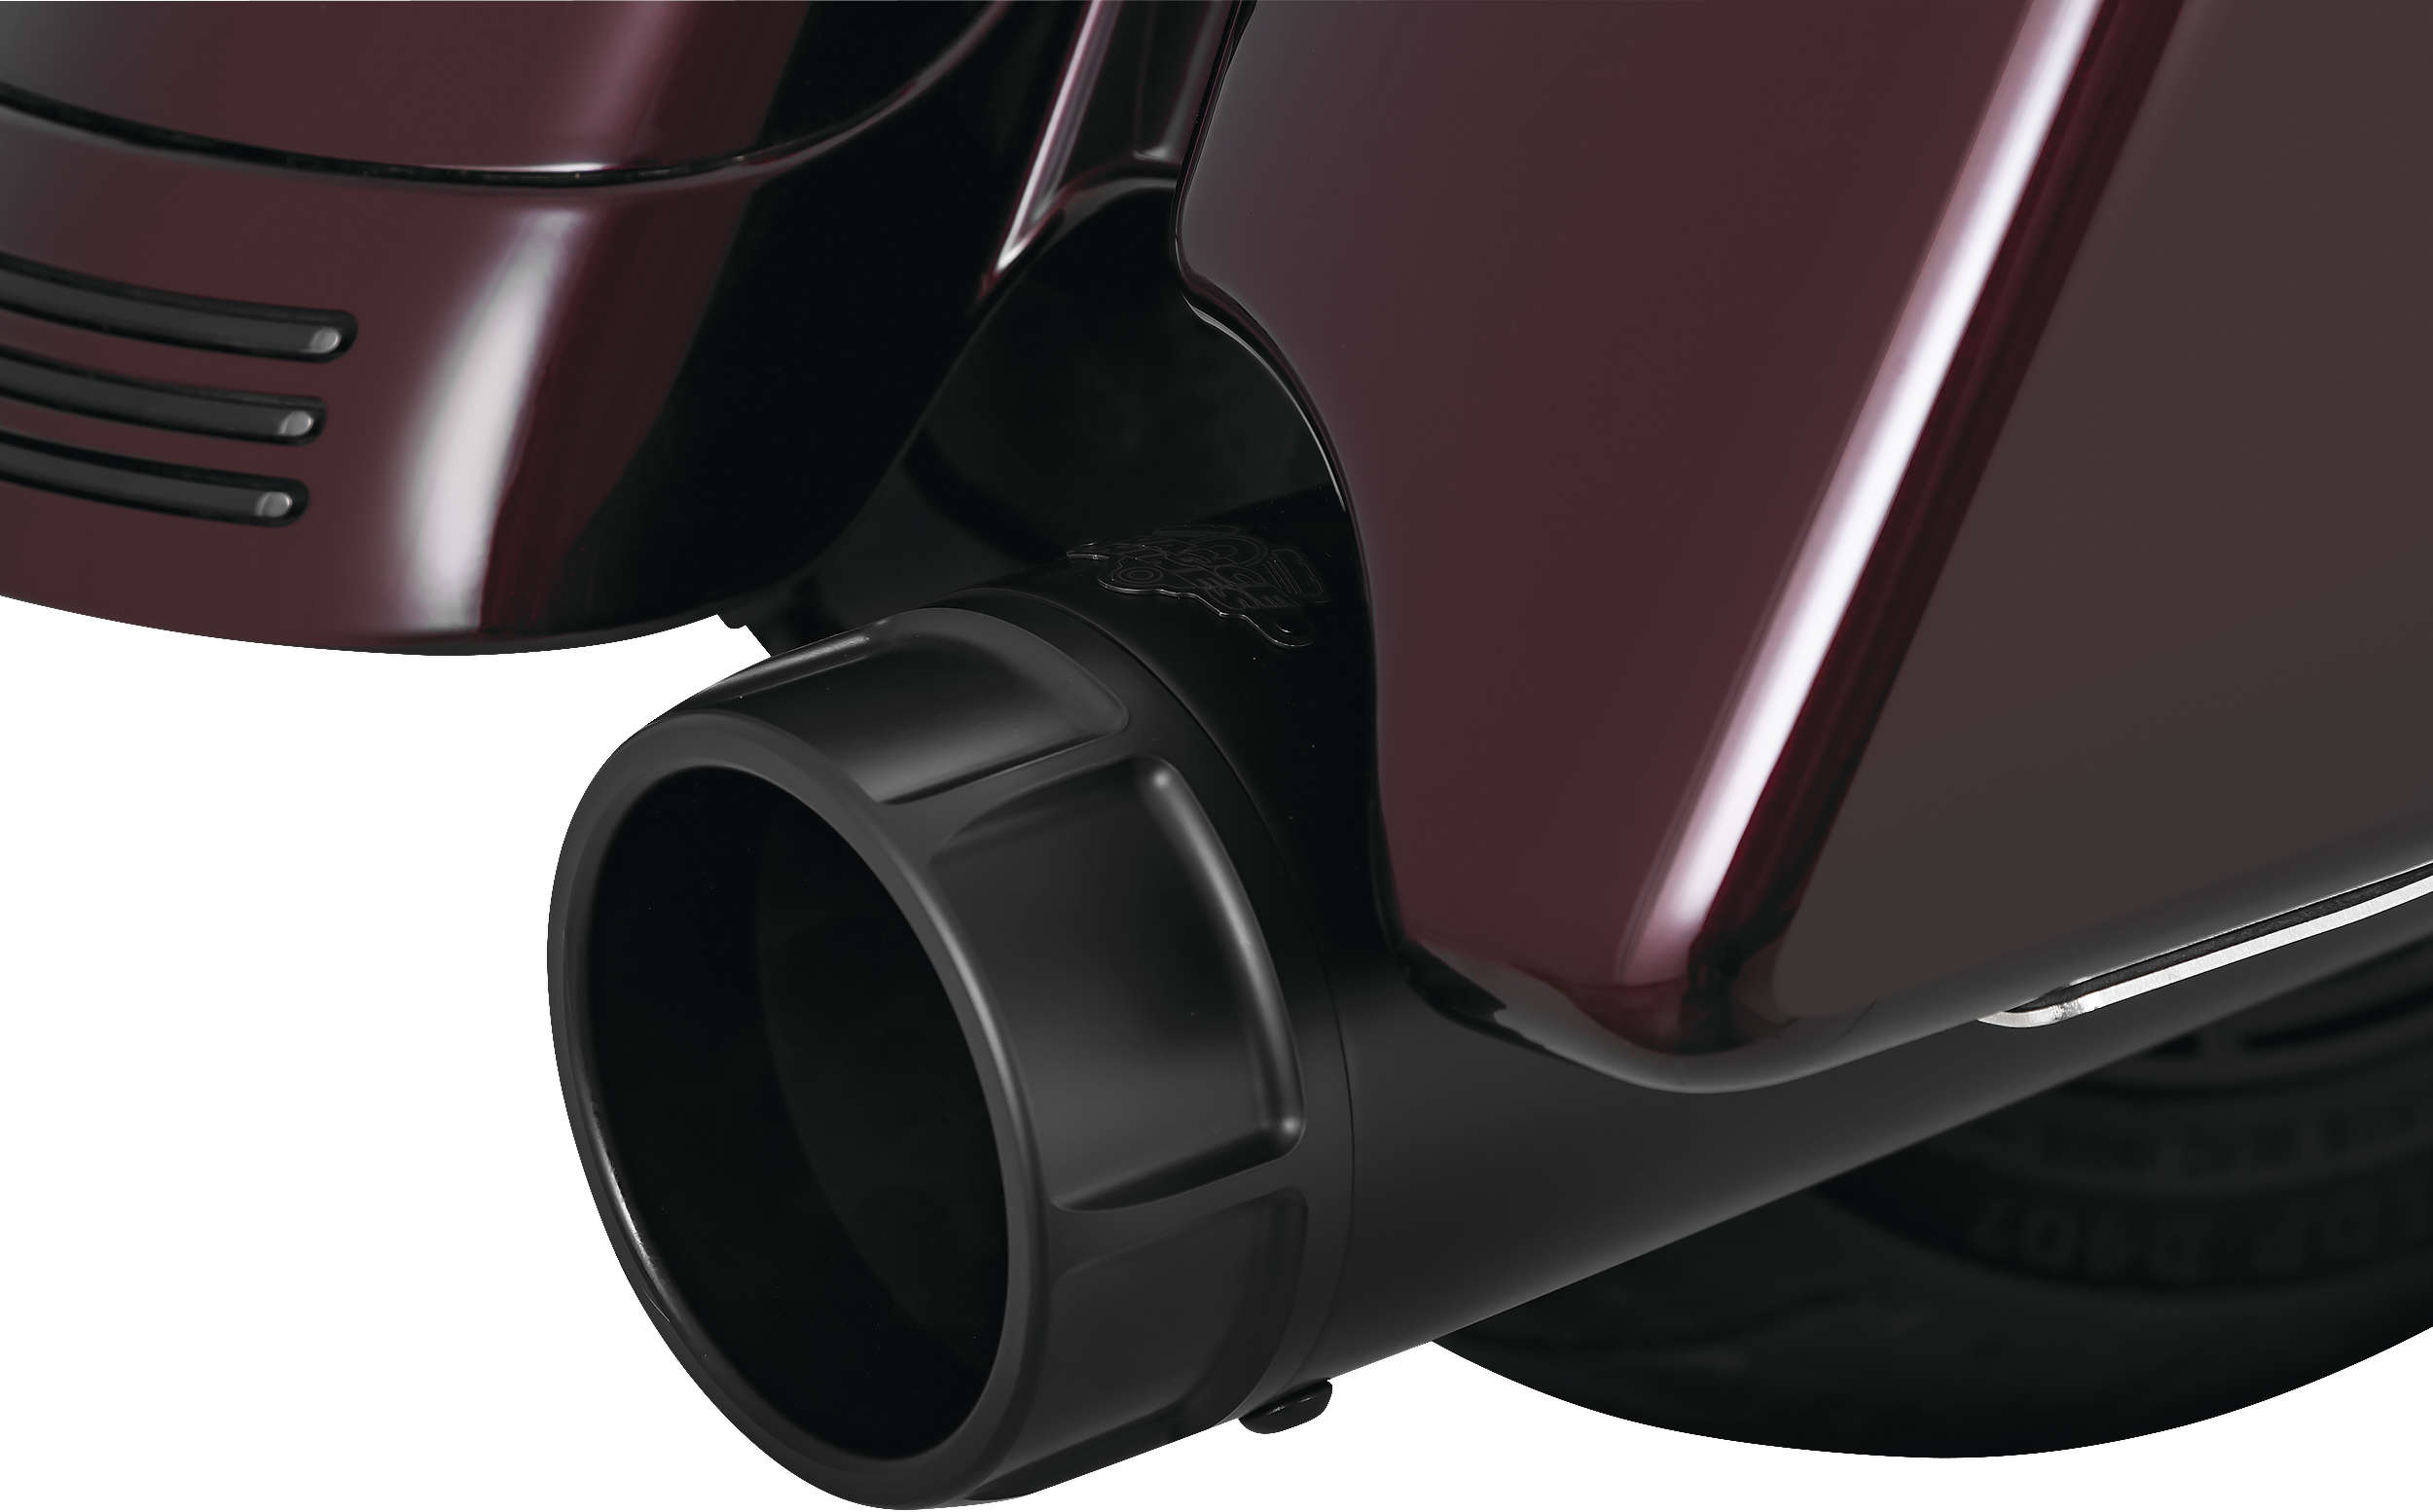 Black Torquer 450 4.5" Slip On Exhaust Mufflers - For 95-16 Harley Davidson FLH, FLT - Click Image to Close